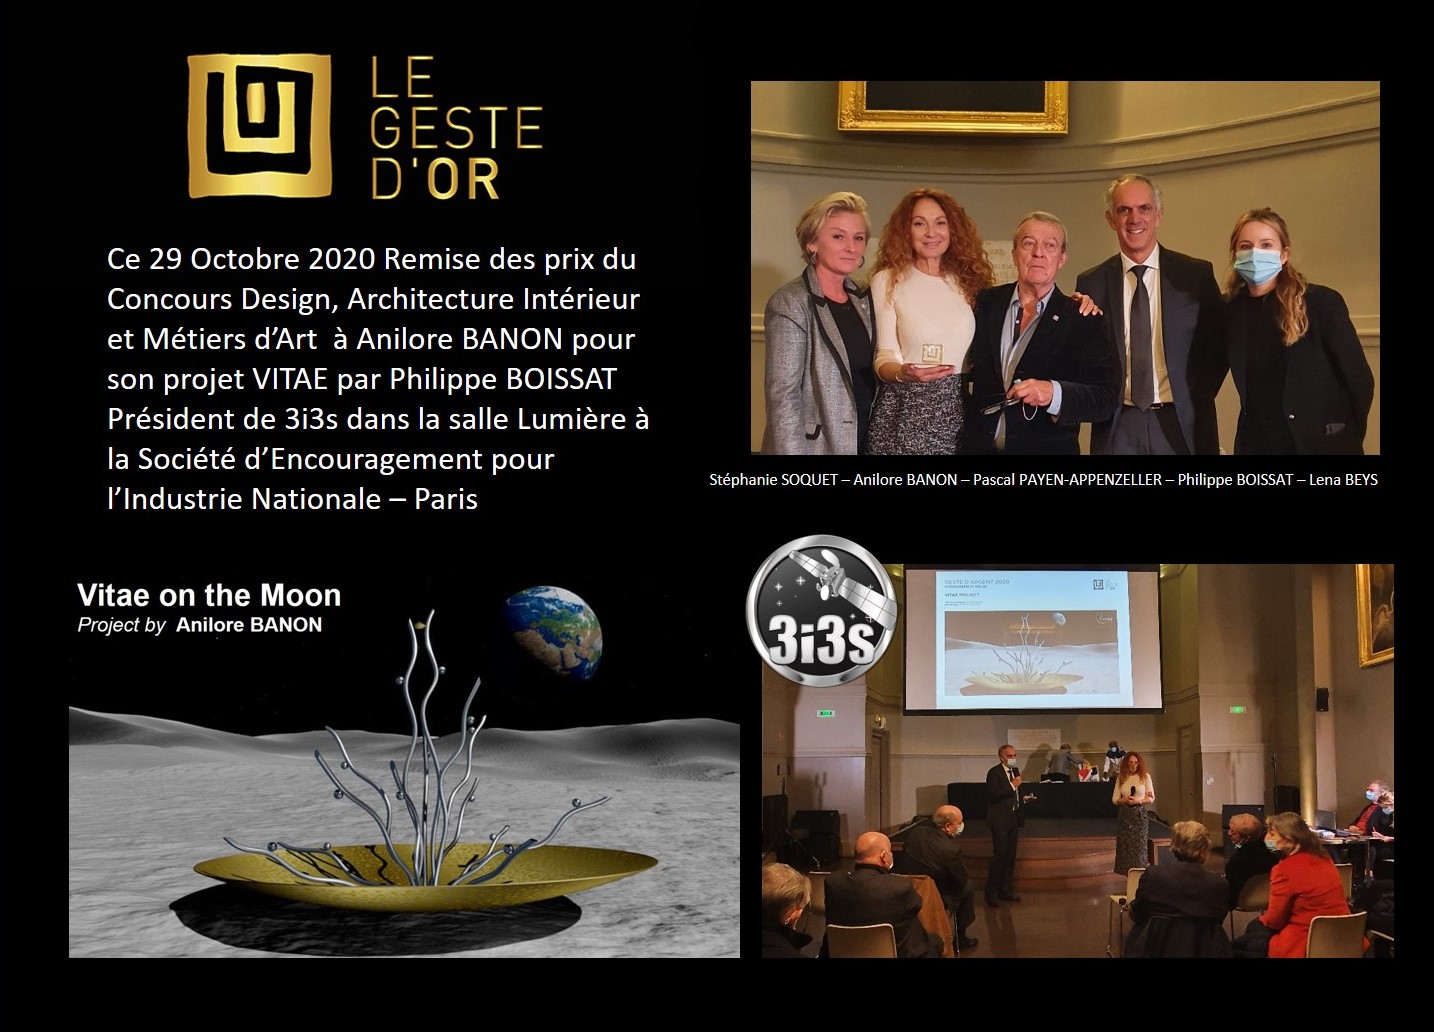 GESTE d’OR 2020 – VITAE by Anilore BANON – 3i3s